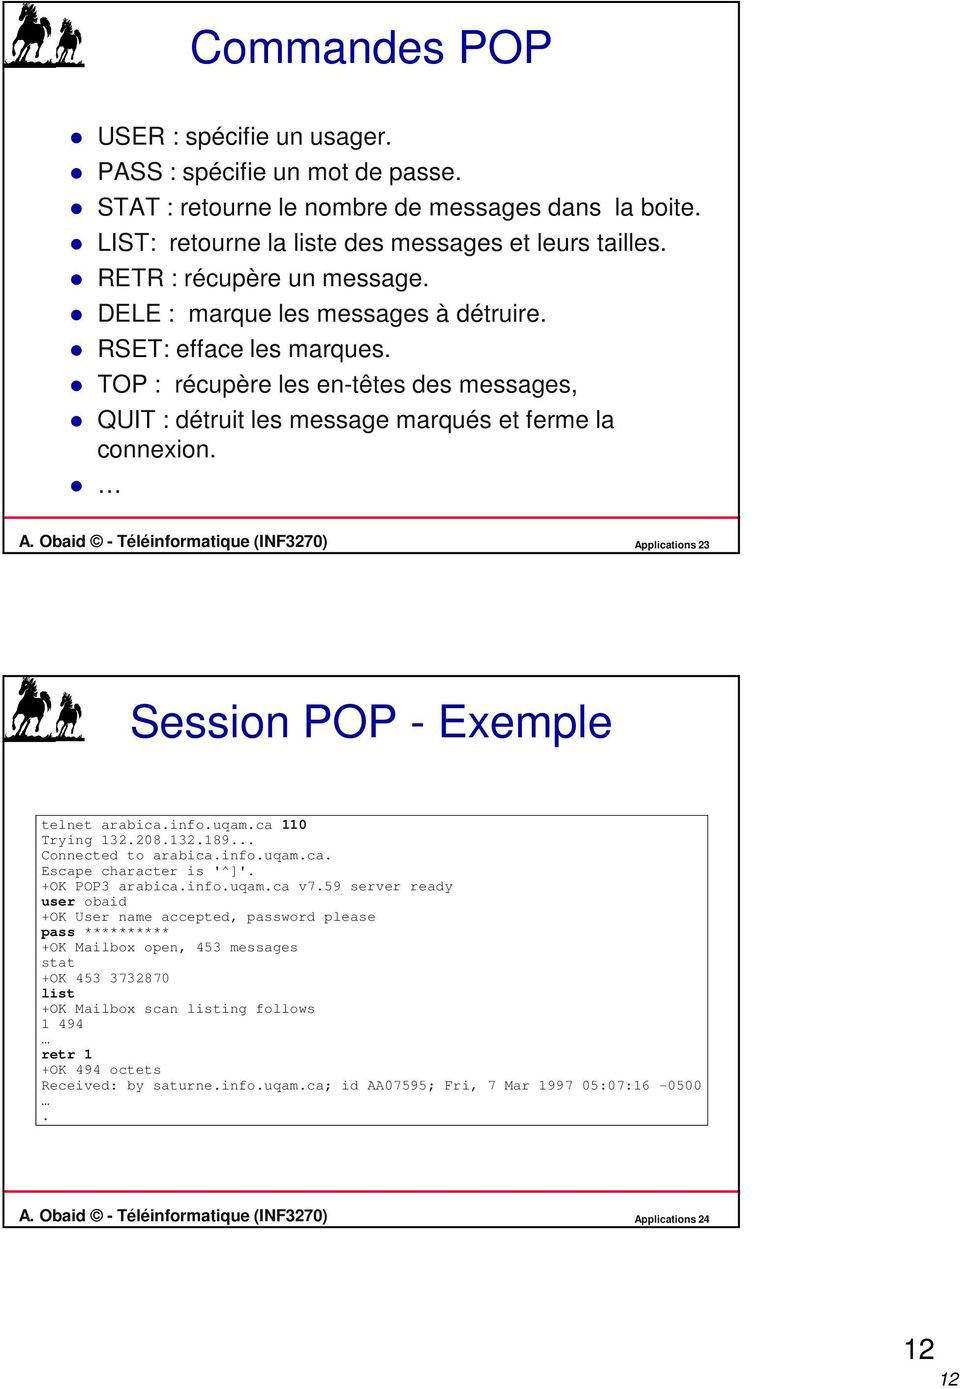 Obaid - Téléinformatique (INF3270) Applications 23 Session POP - Exemple telnet arabica.info.uqam.ca 110 Trying 132.208.132.189... Connected to arabica.info.uqam.ca. Escape character is '^]'.